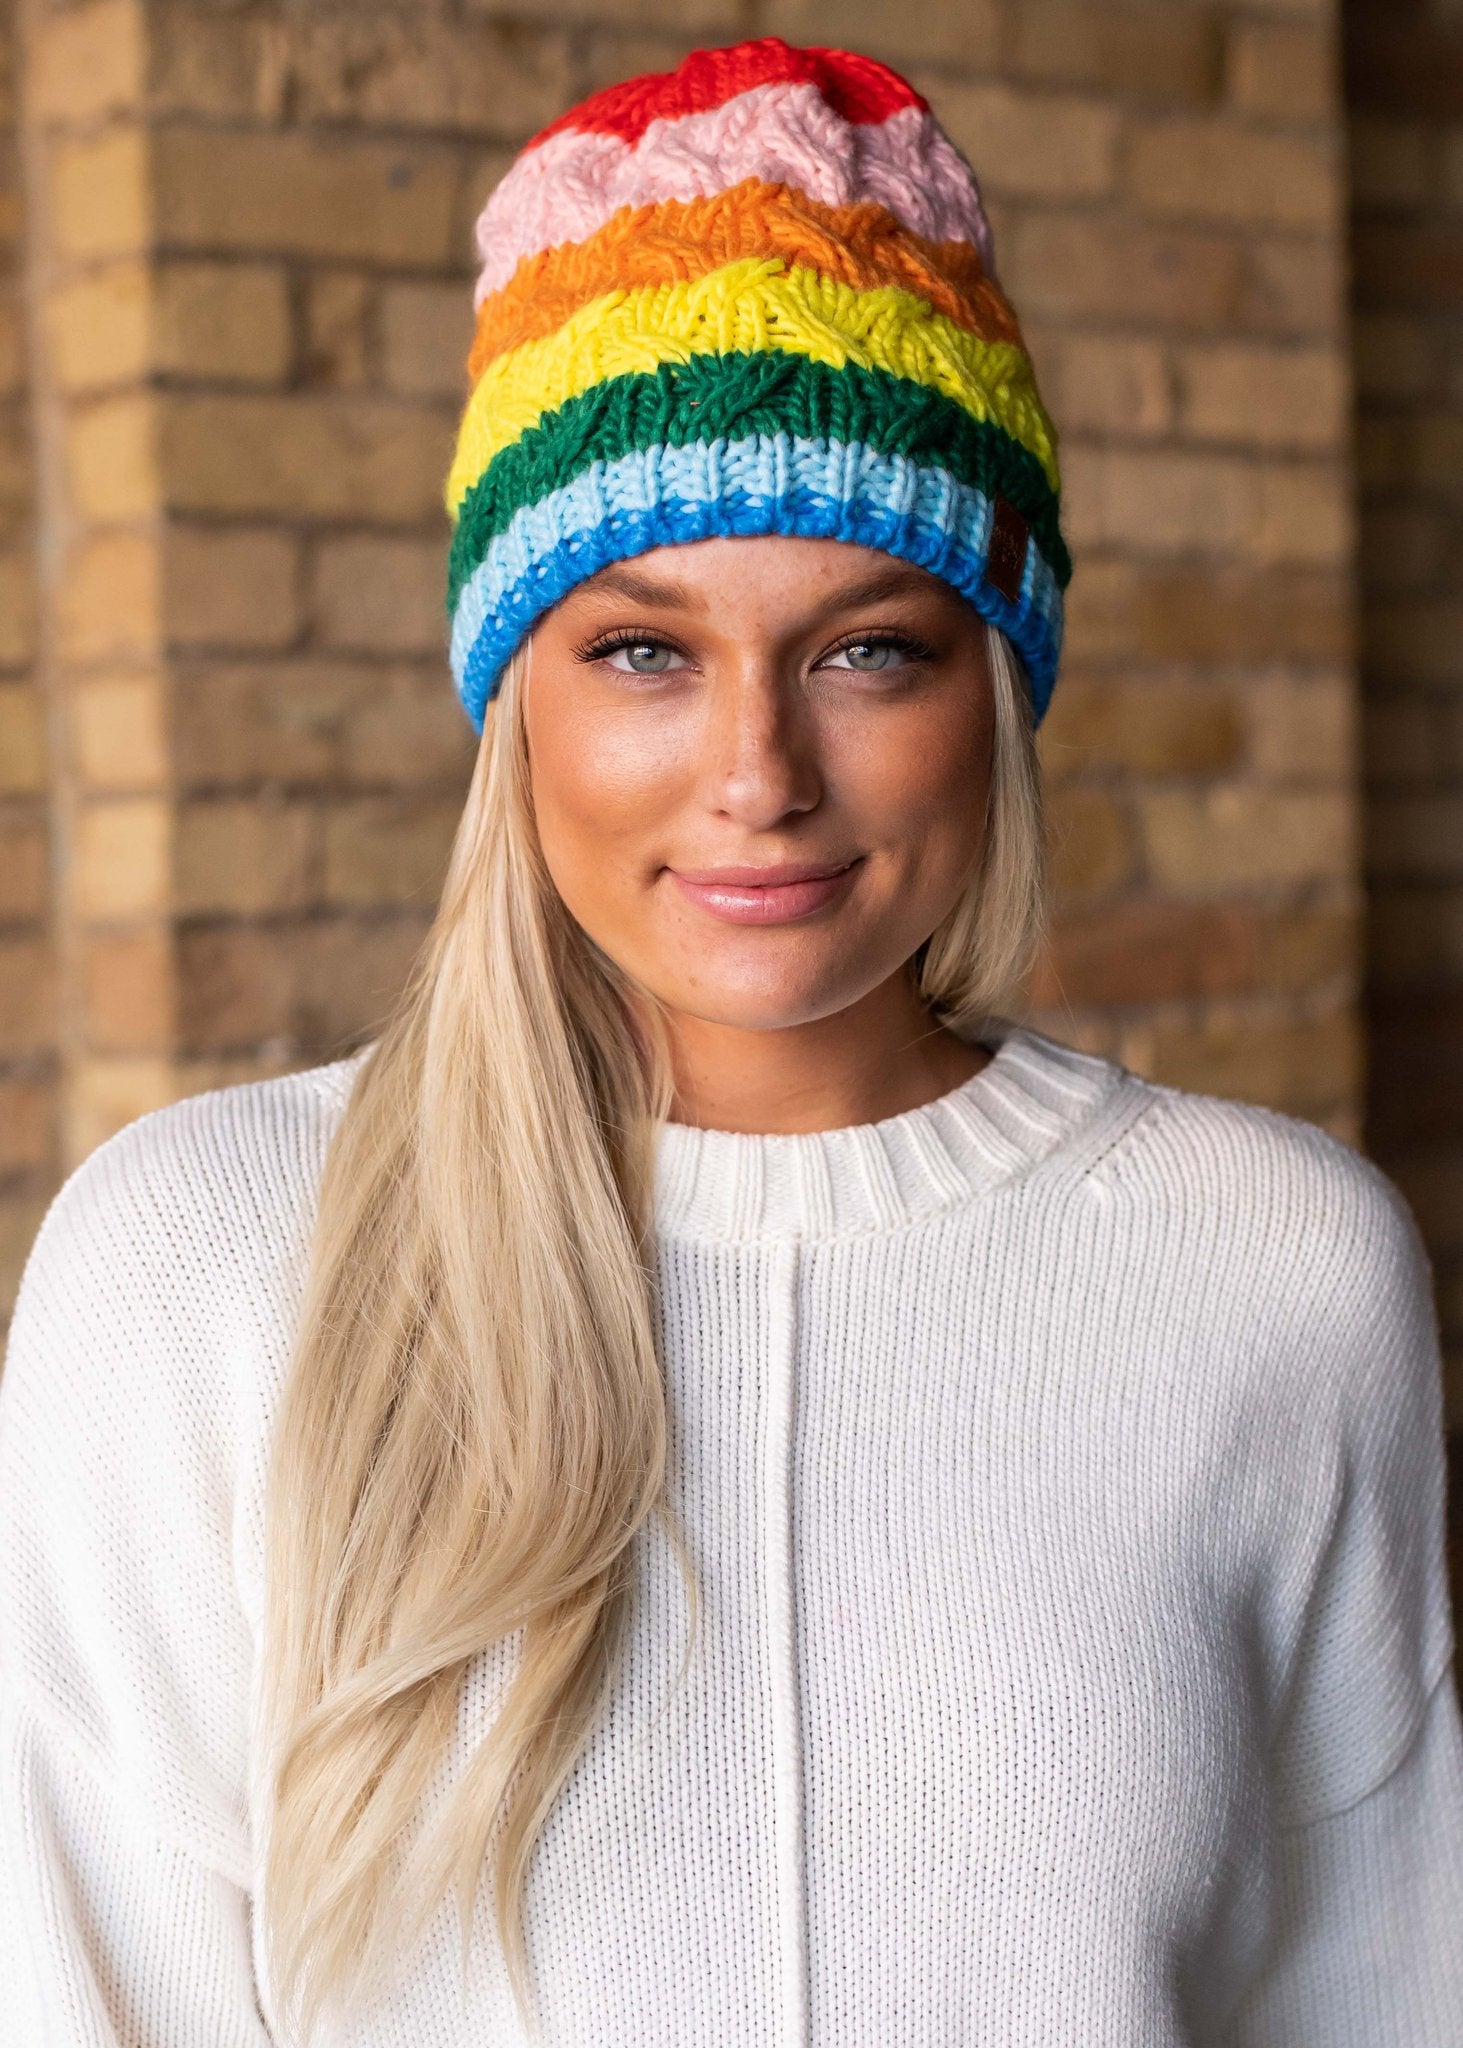 Rainbow w/ Pink Stripe Cable Knit Fleece Lined Beanie